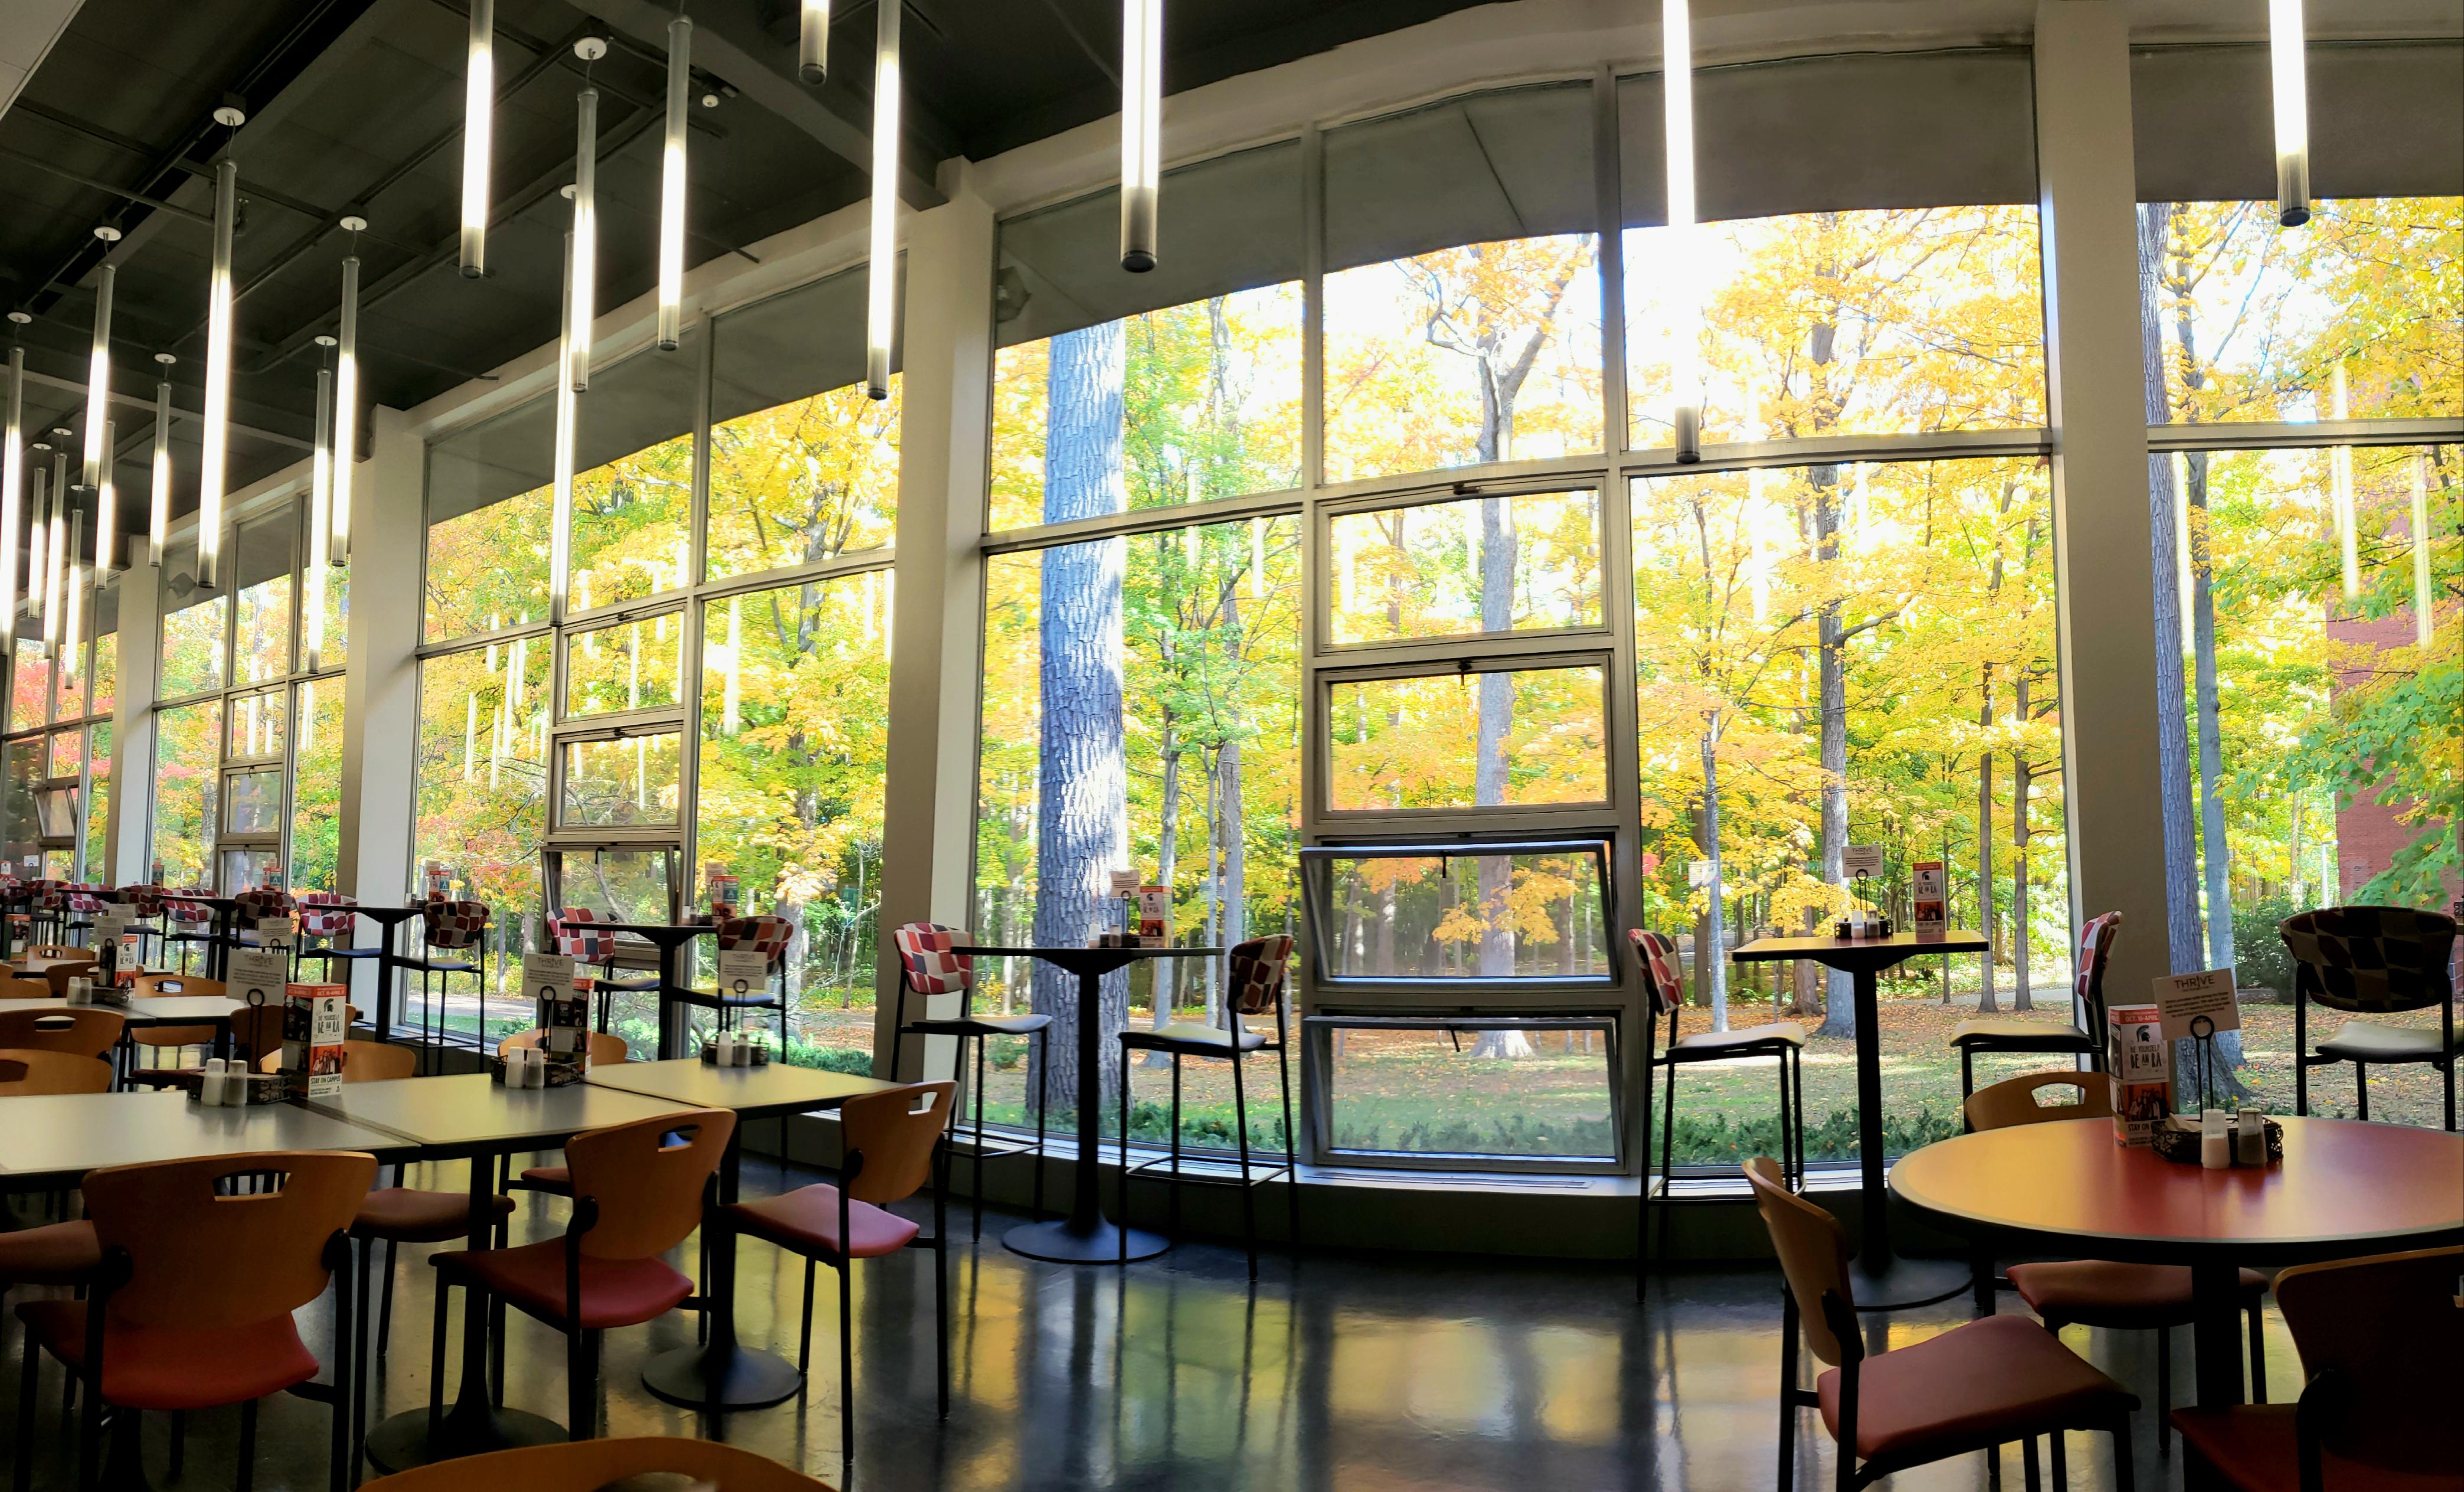 An image of the Thrive dining room. The windows overlook River Trail